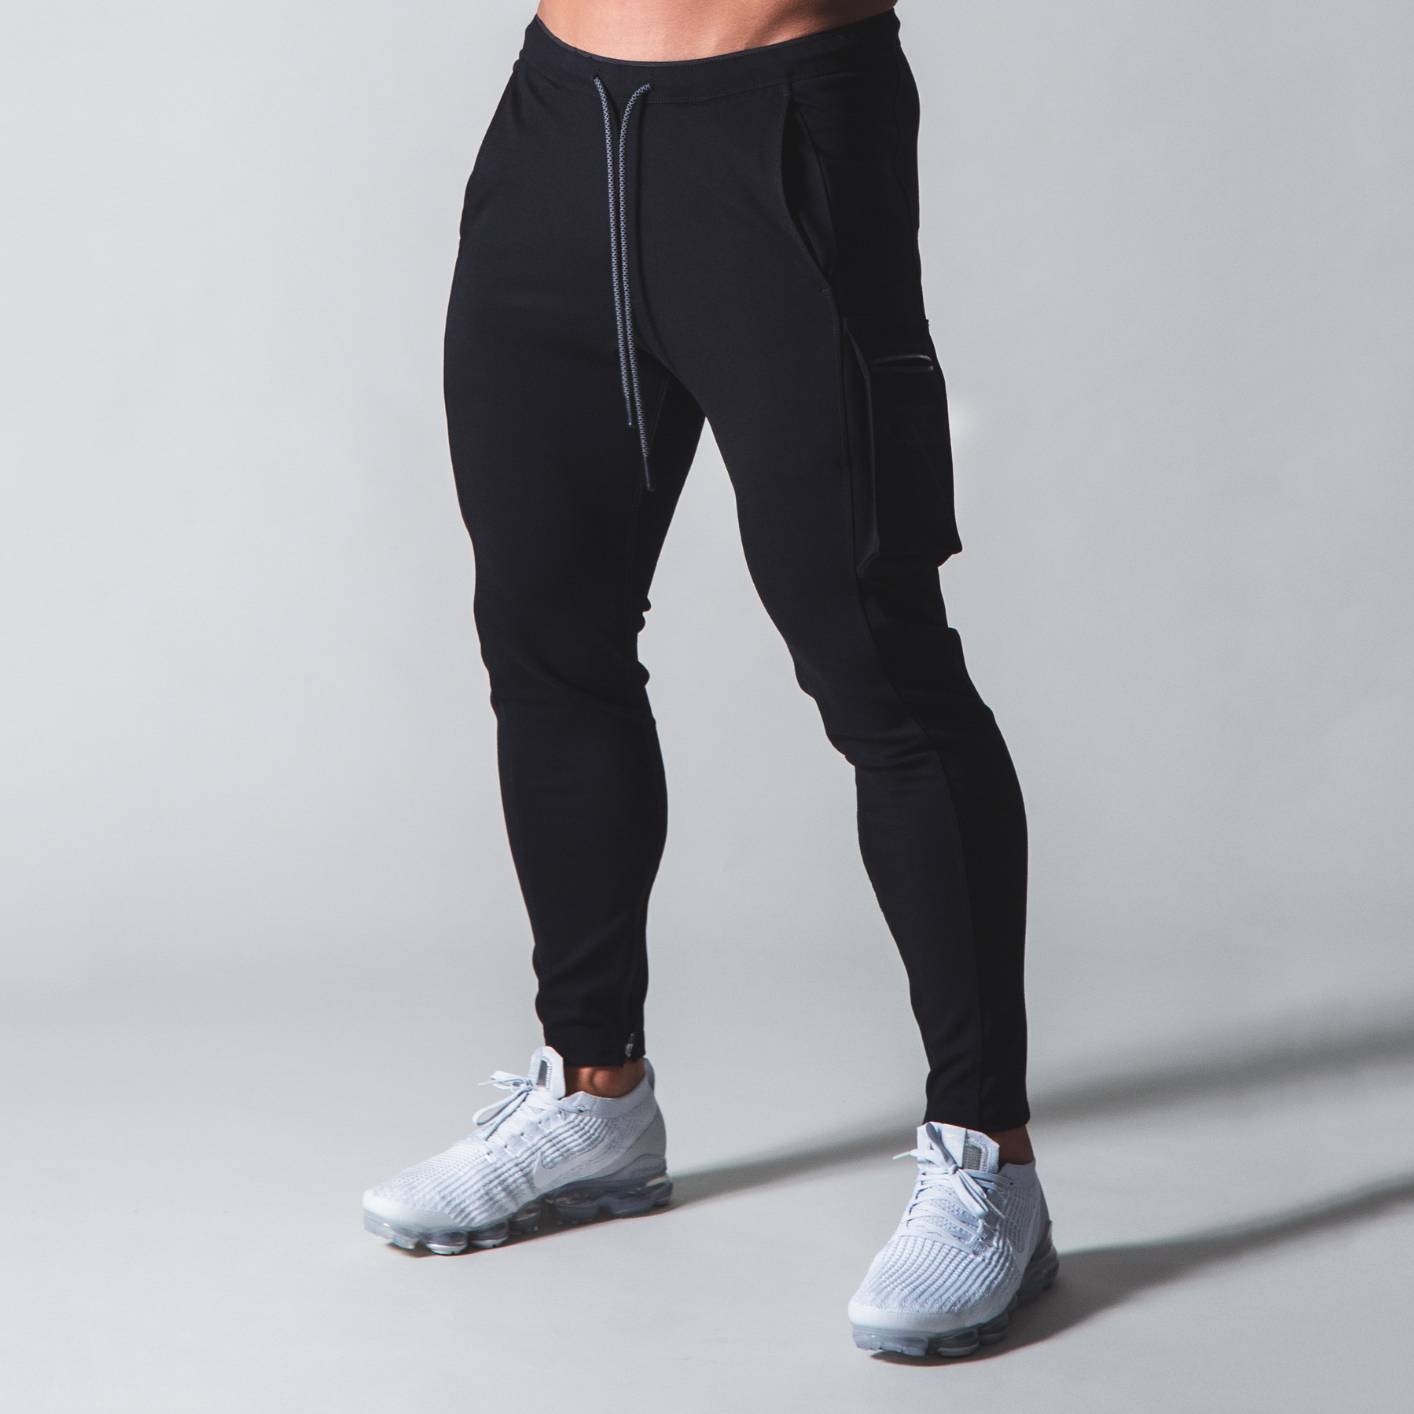 LYFT-CK11 Running Outdoor Fashion Elastic Waist Training Pencil Trousers With Pocket Fitness Gym Men's Sports Pants